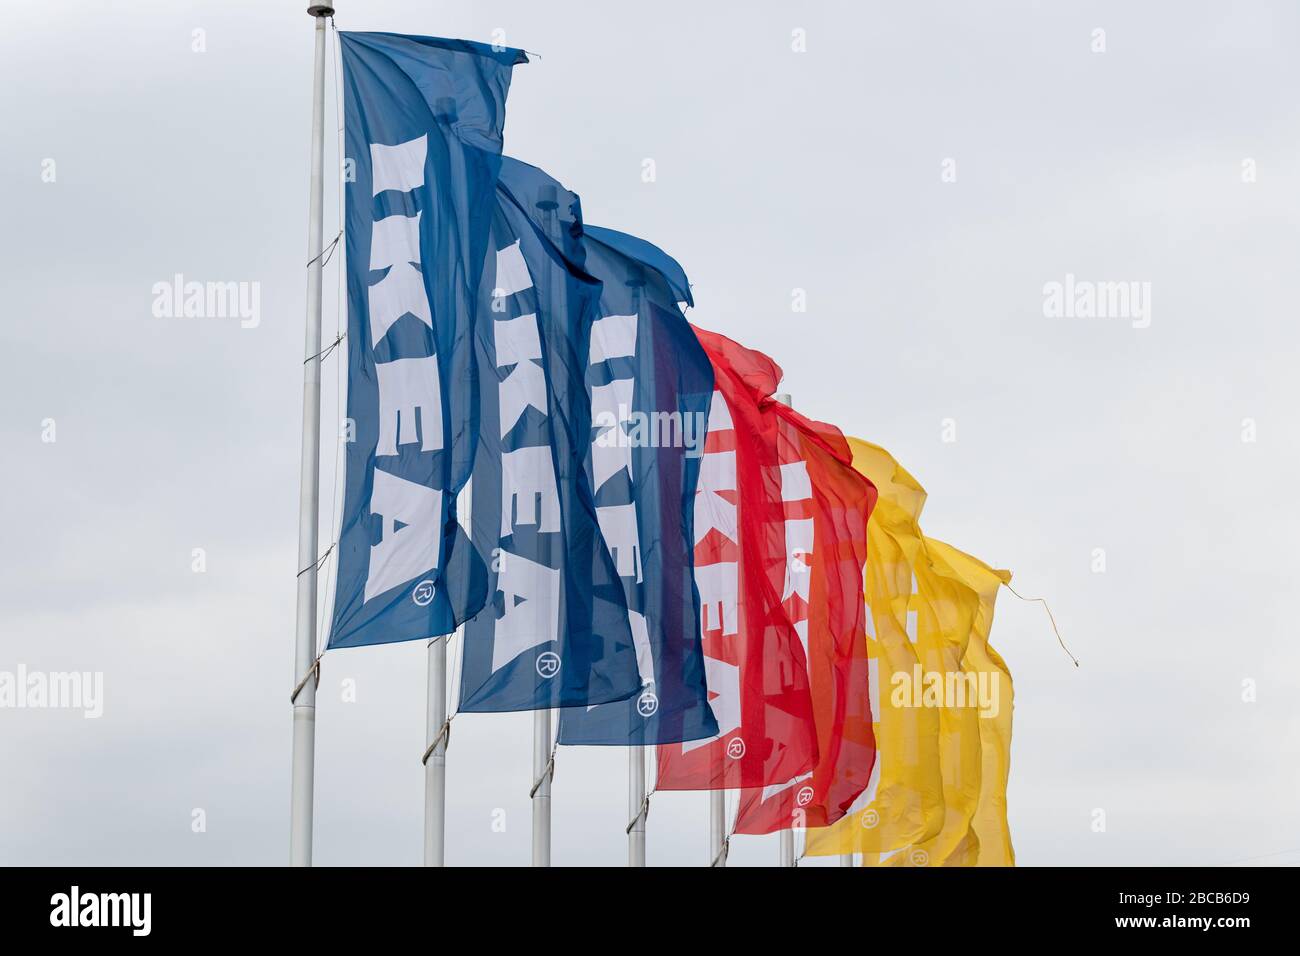 IKEA logos on colorful flags seen waving on a windy day at a store location  Stock Photo - Alamy